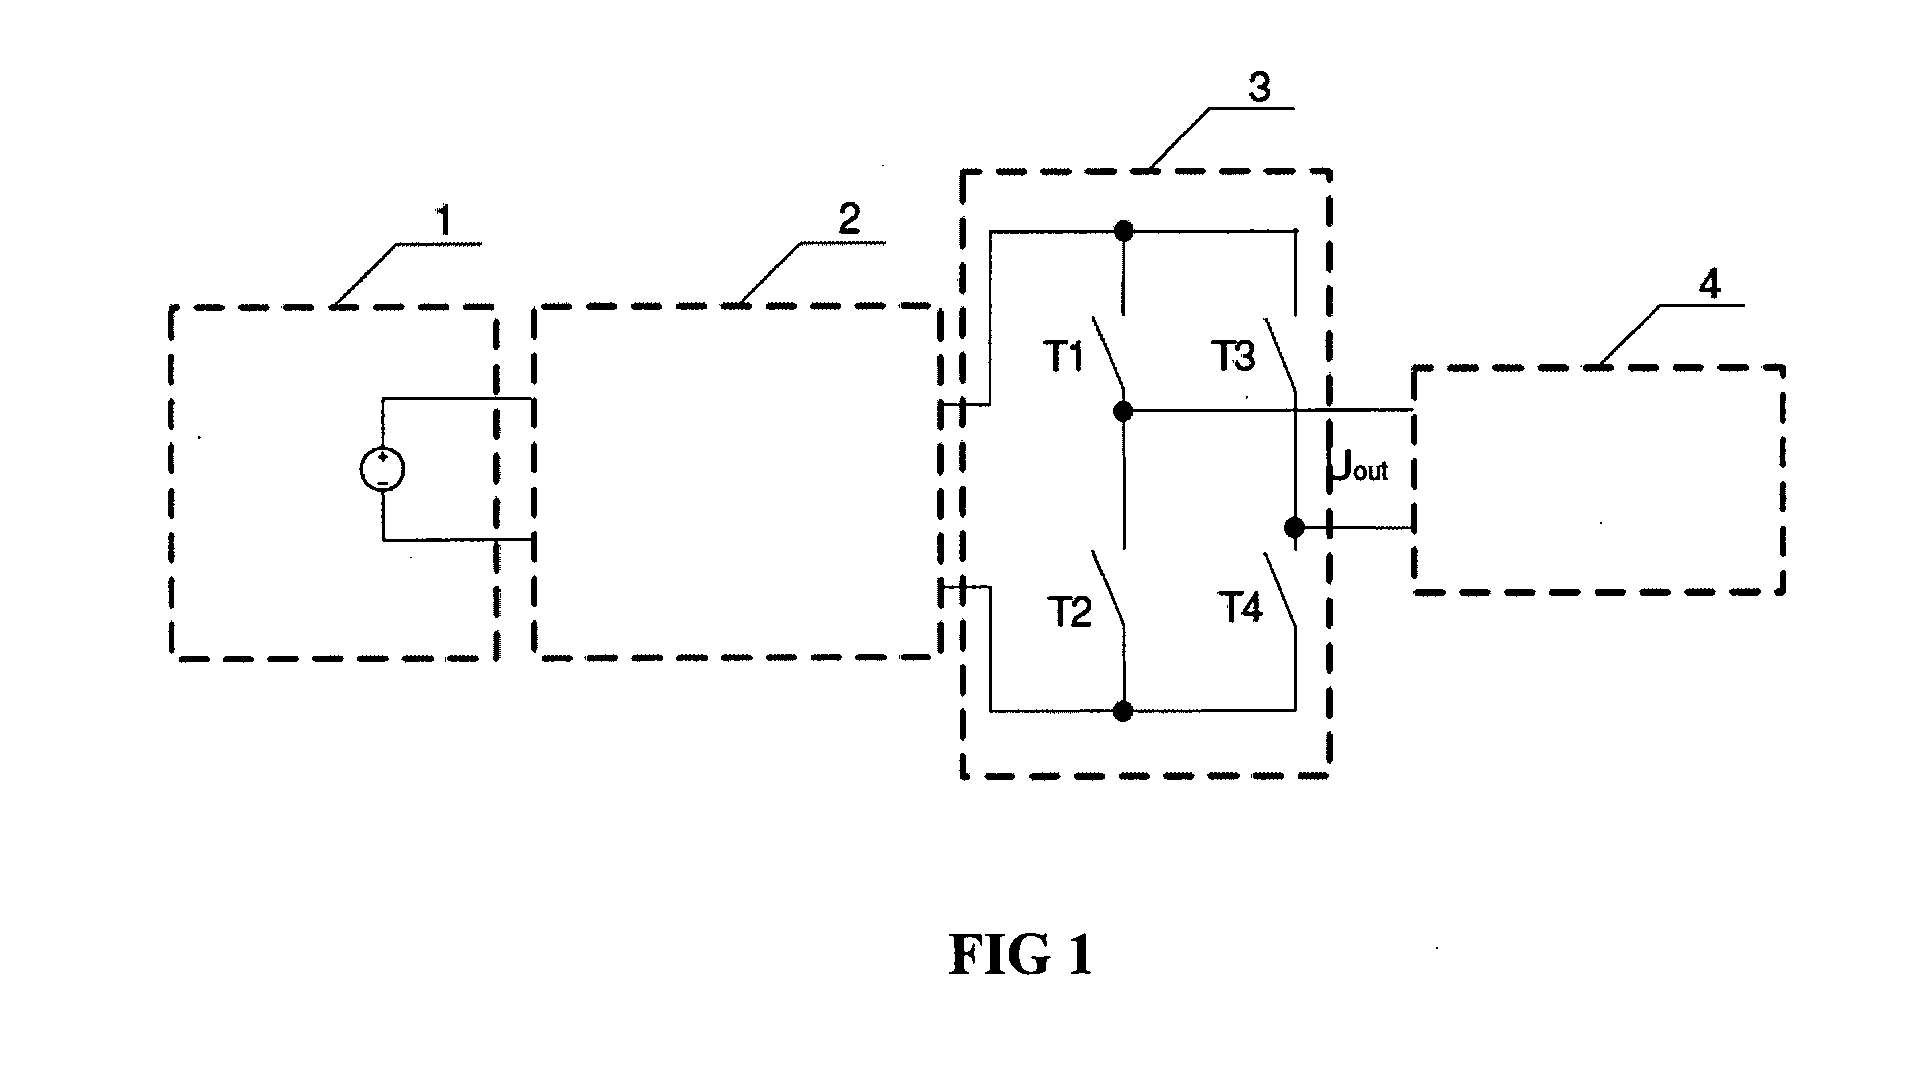 Method of shoot-through generation for modified sine wave z-source, quasi-z-source and trans-z-source inverters